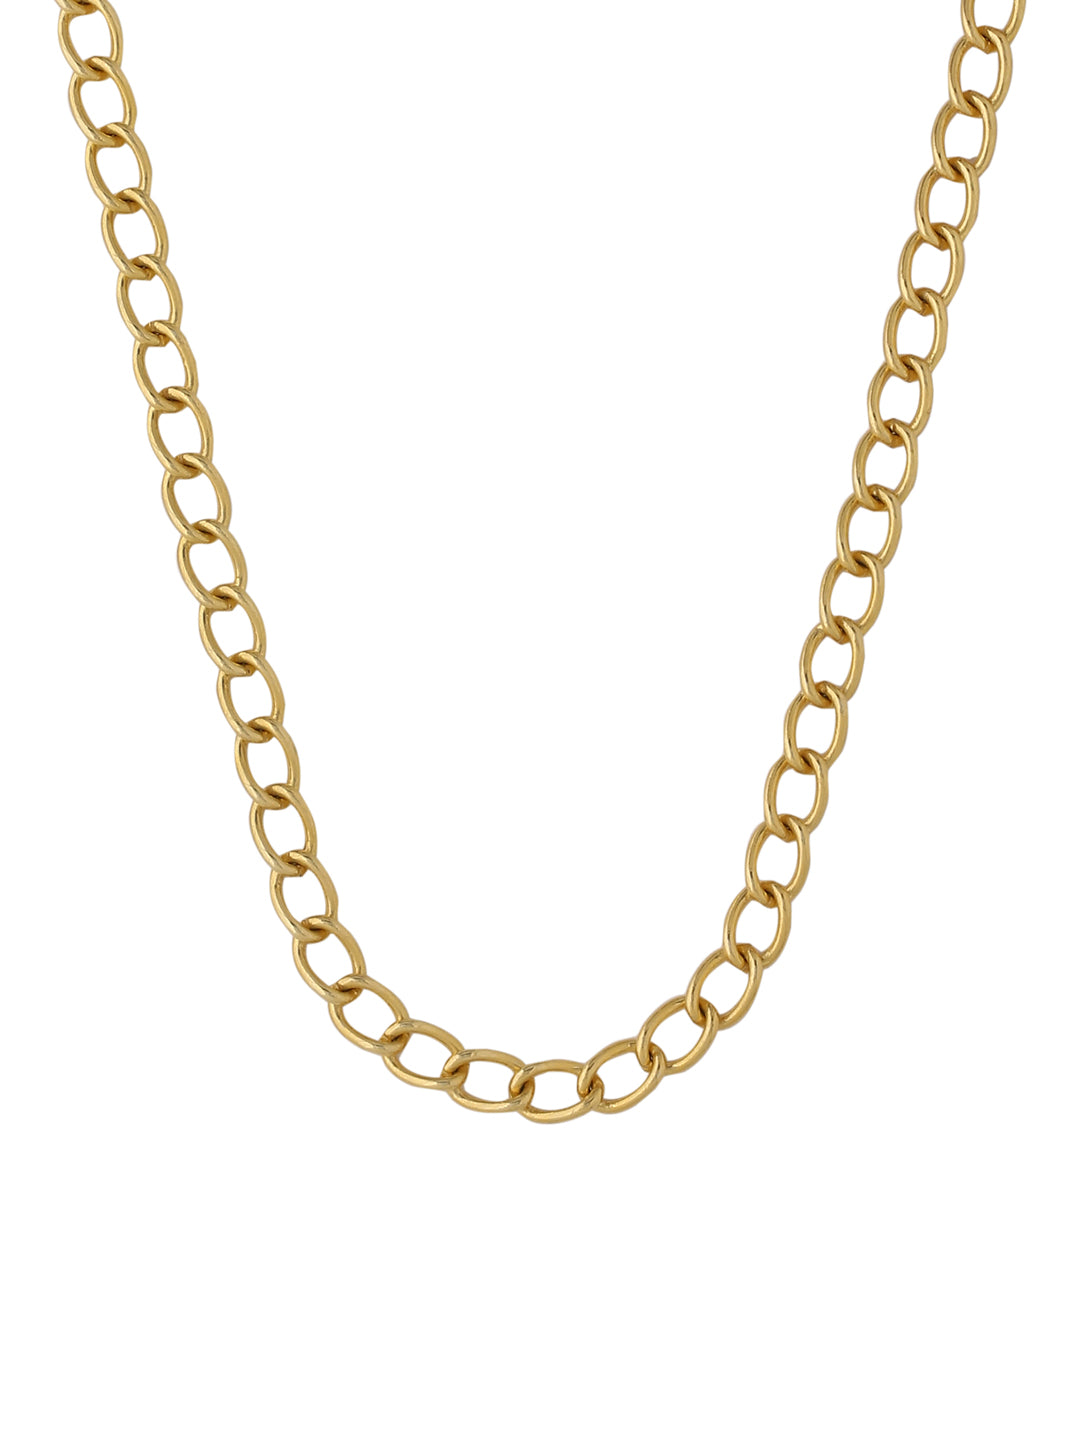 Cable link chain necklace